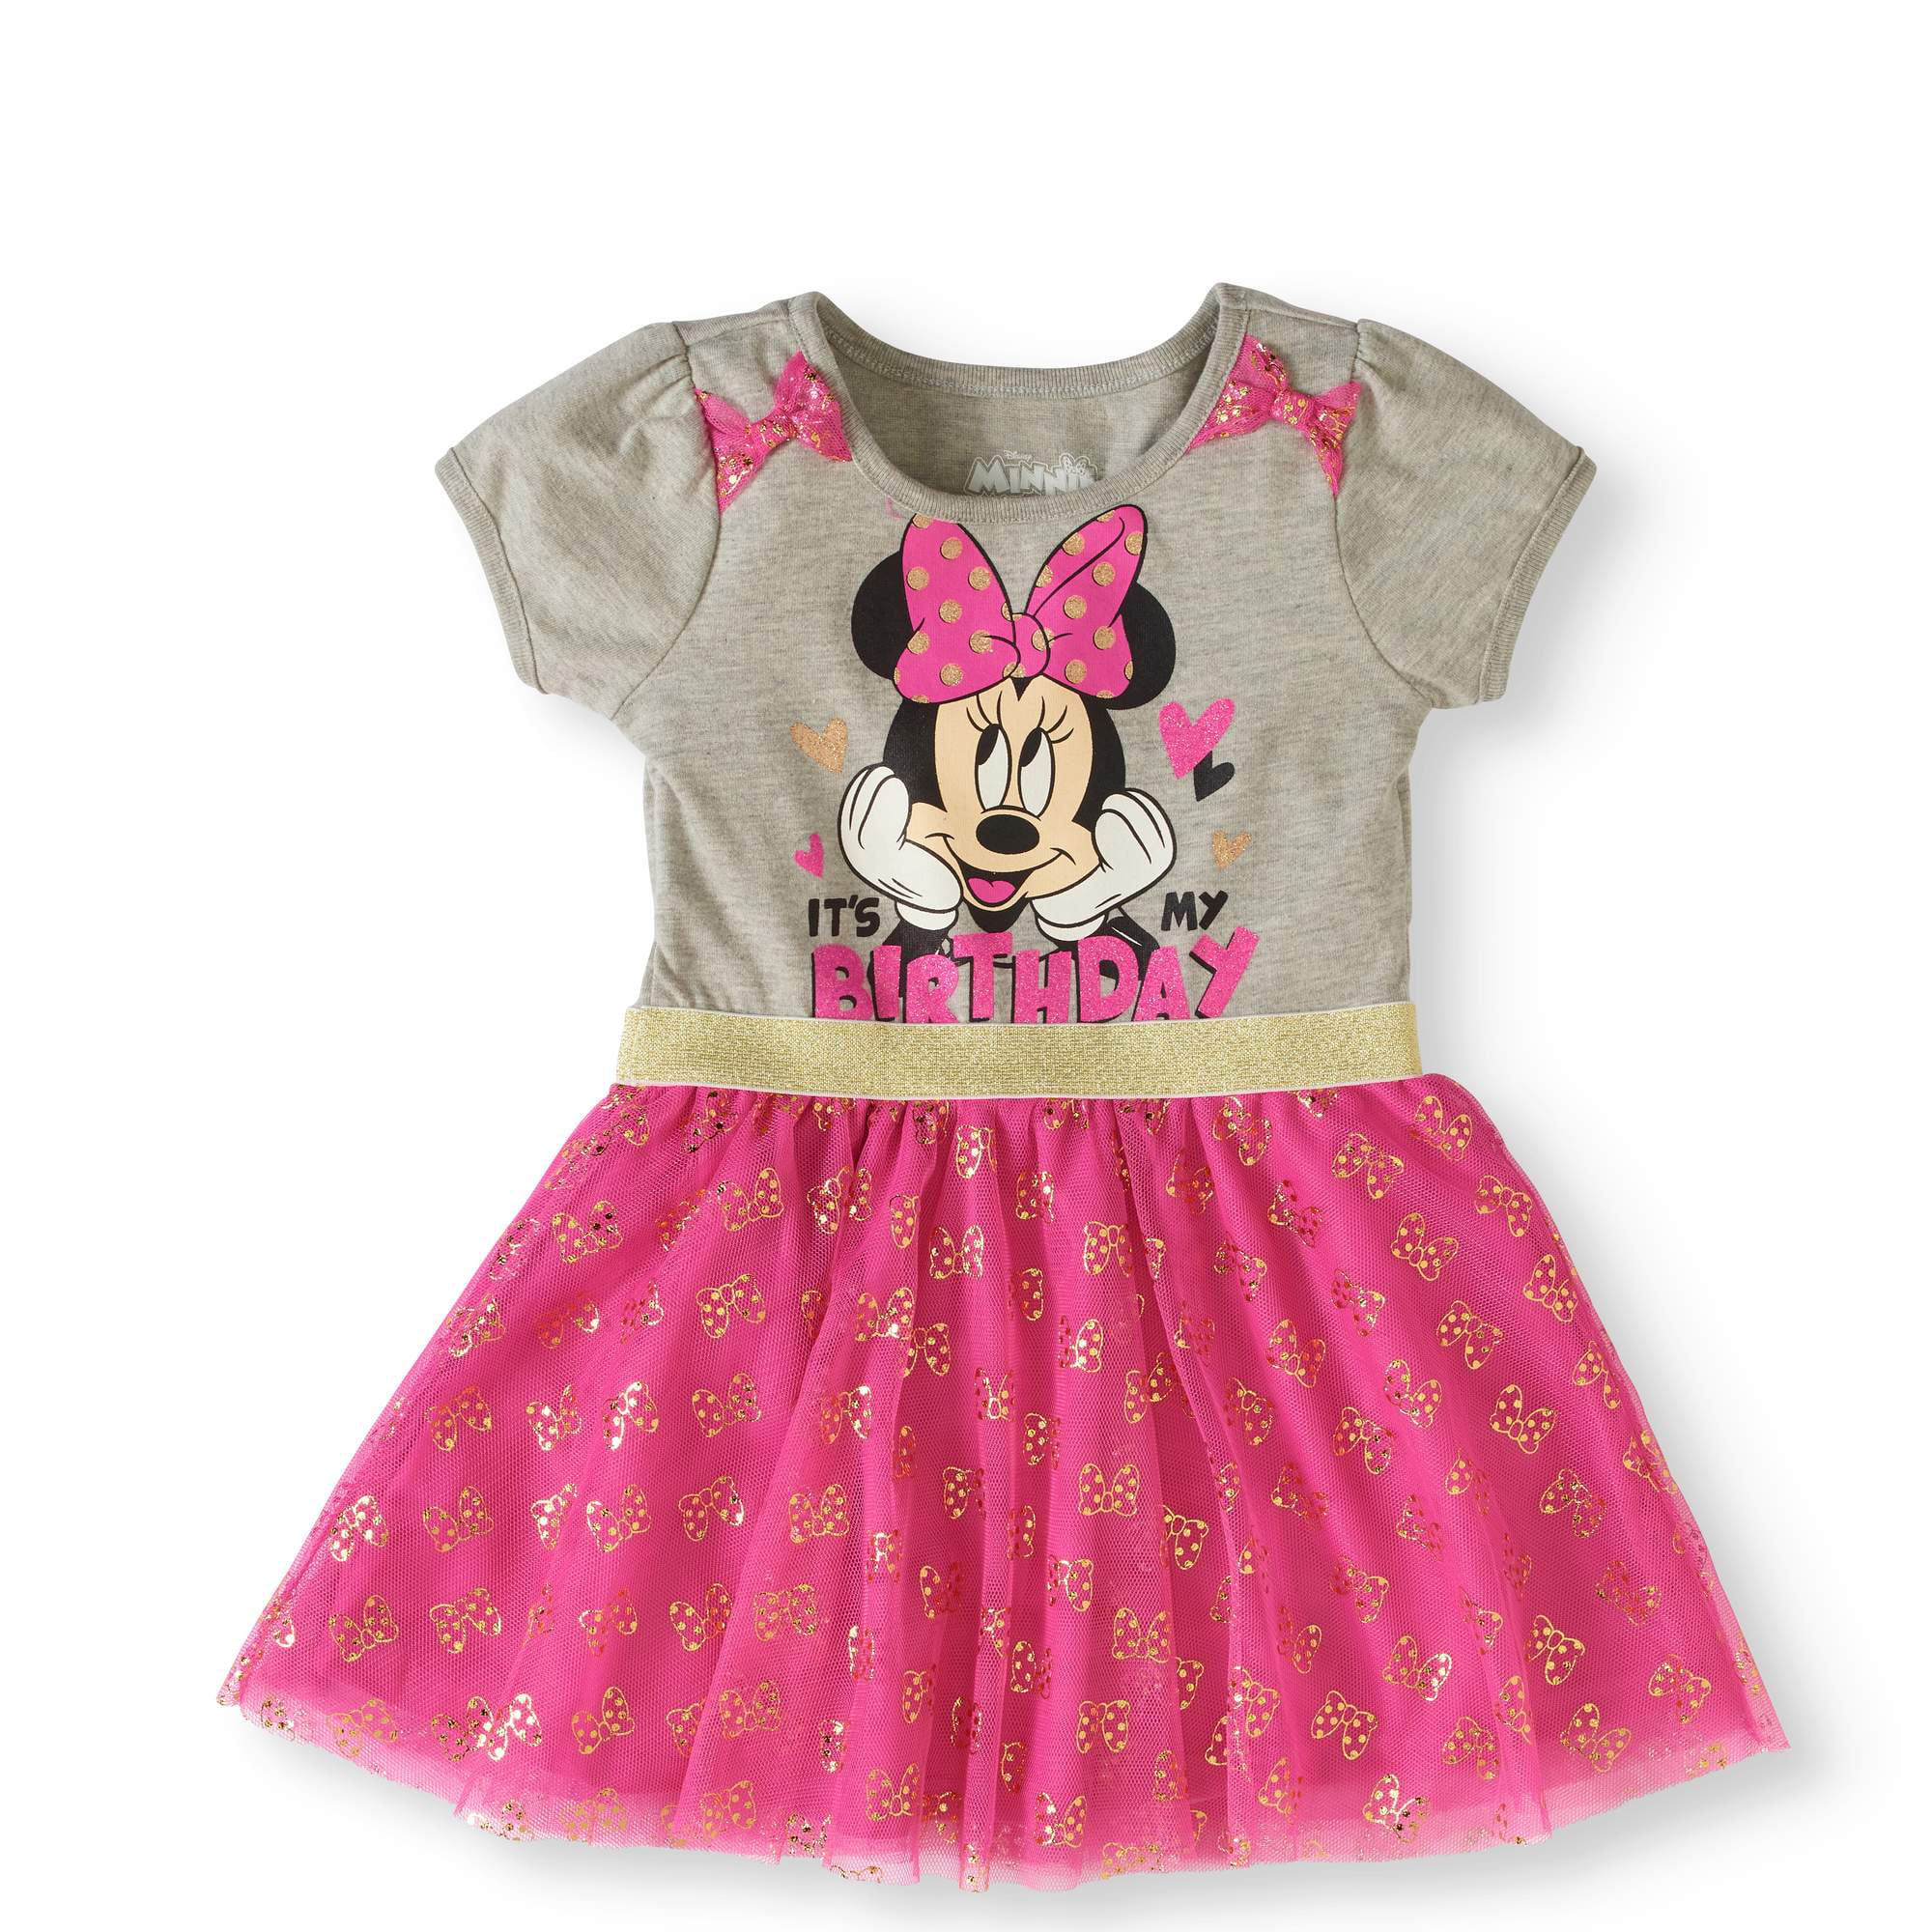 minnie mouse party dresses for toddlers